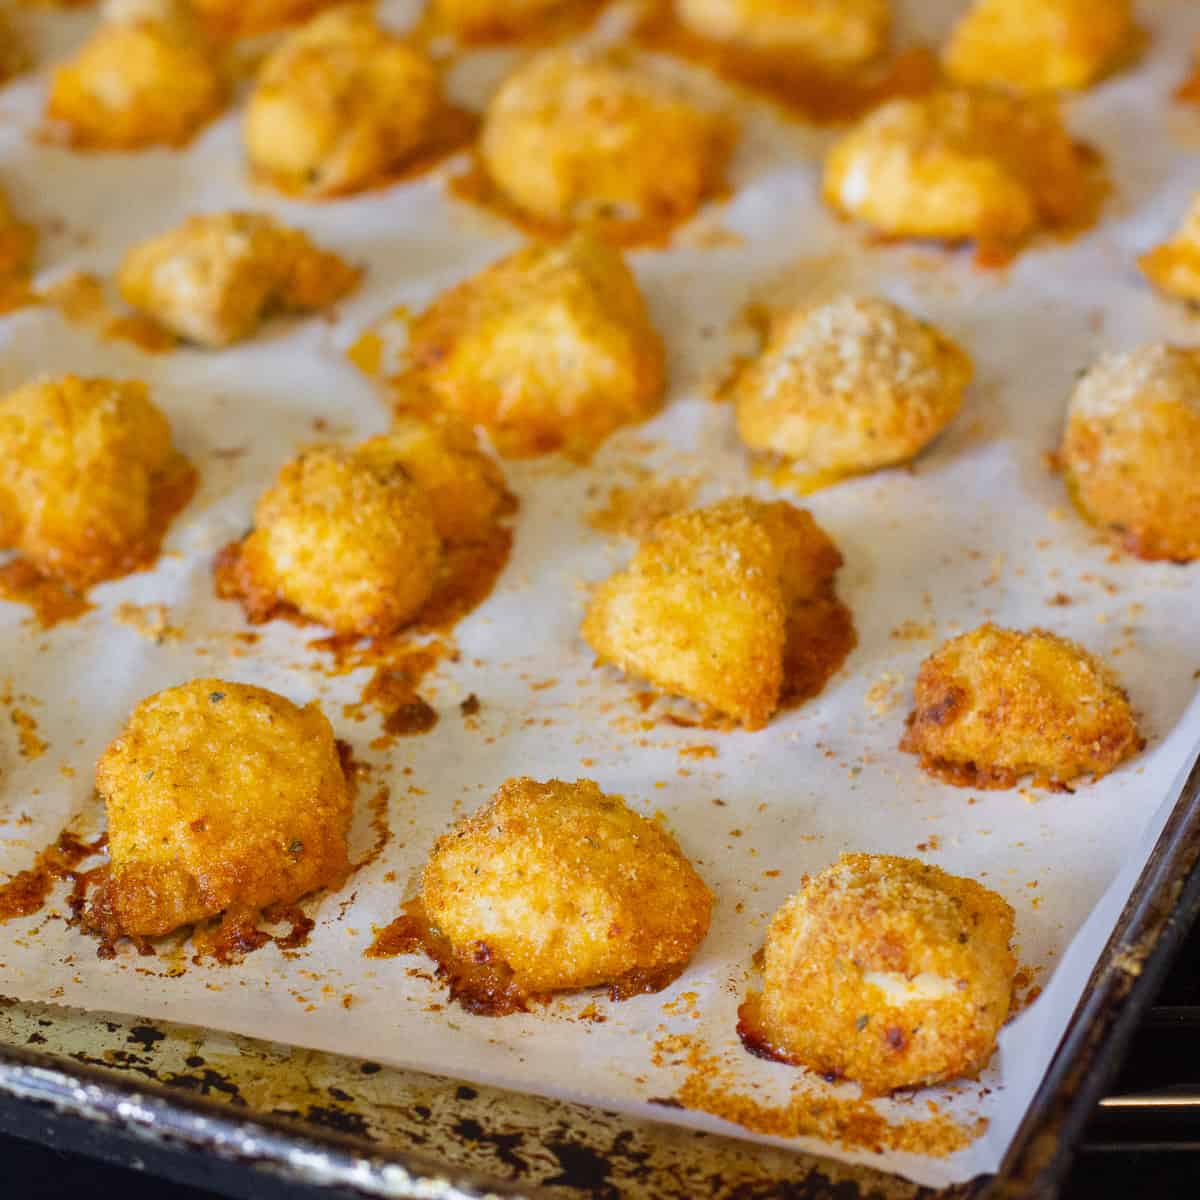 Cooked nuggets on a baking sheet.